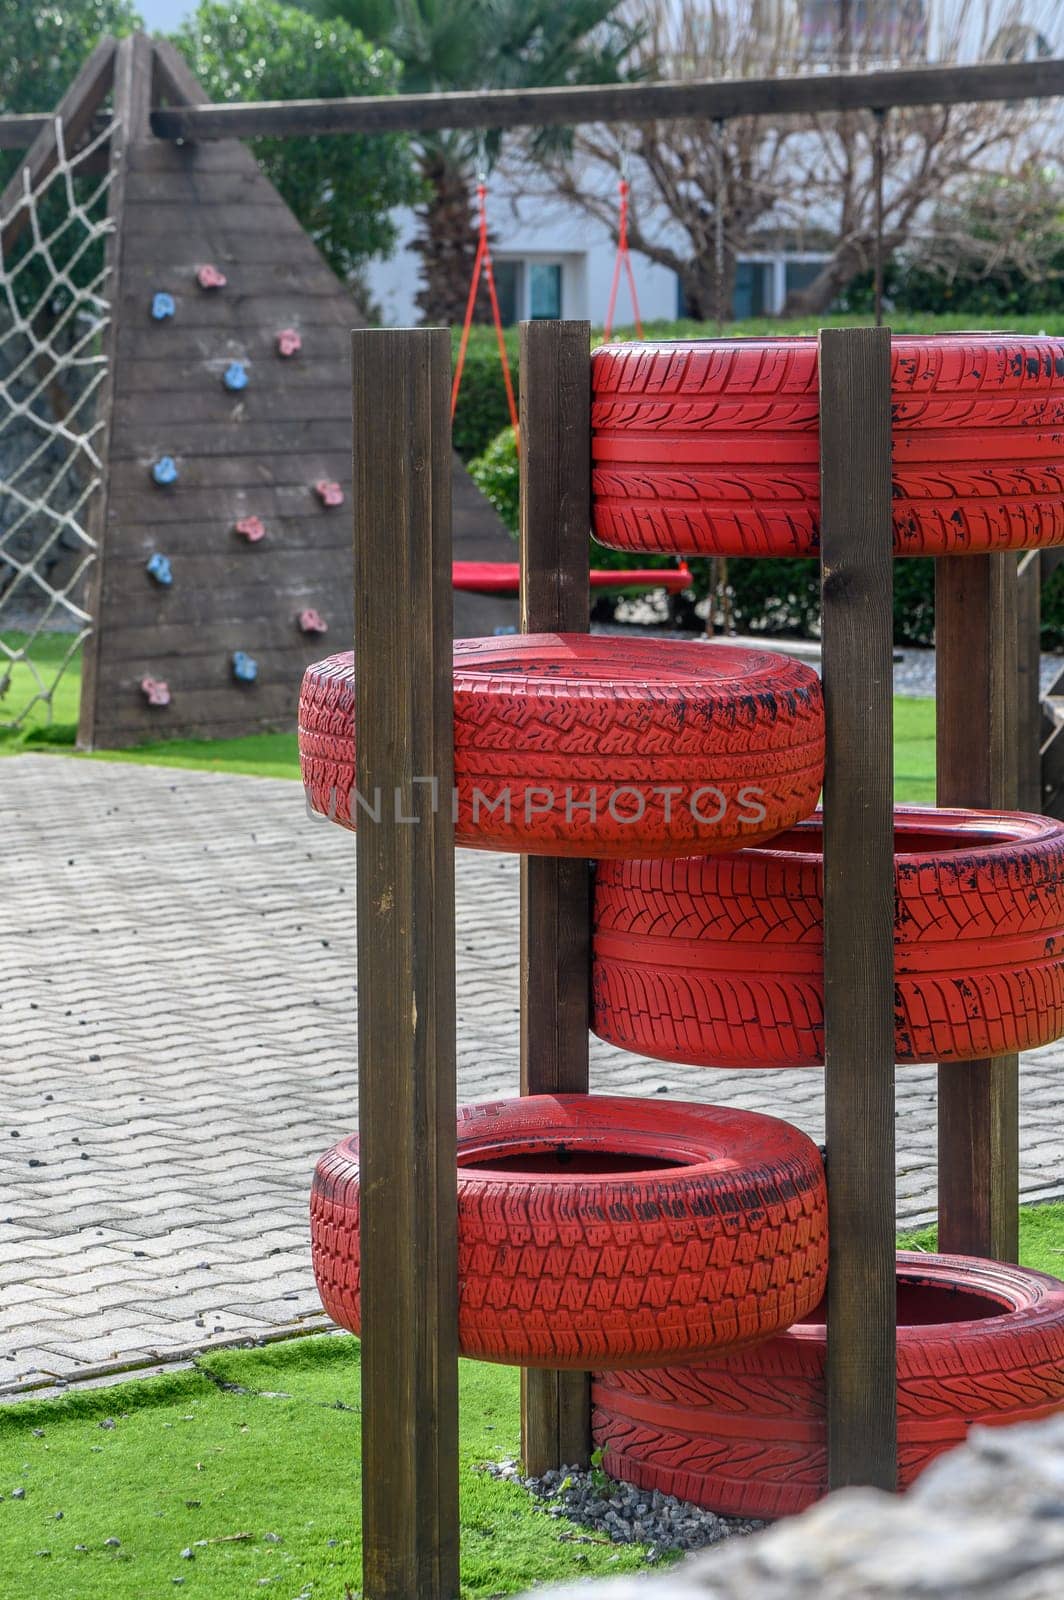 children's playground made from car tires, tire recycling 1 by Mixa74